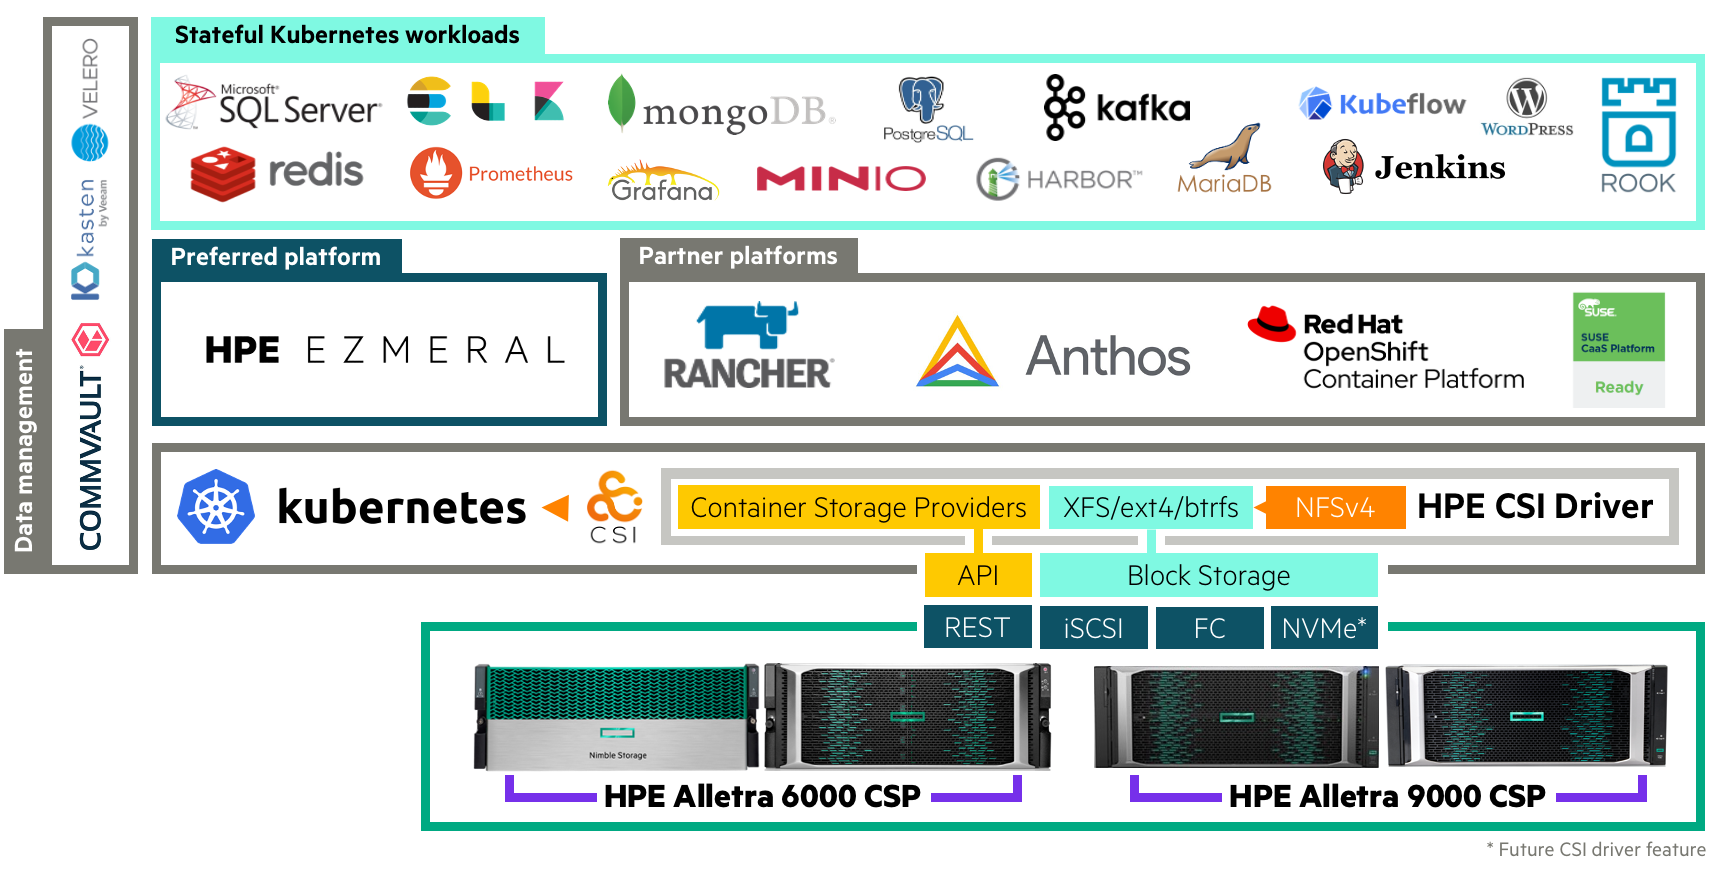 HPE CSI Driver for Kubernetes Overview